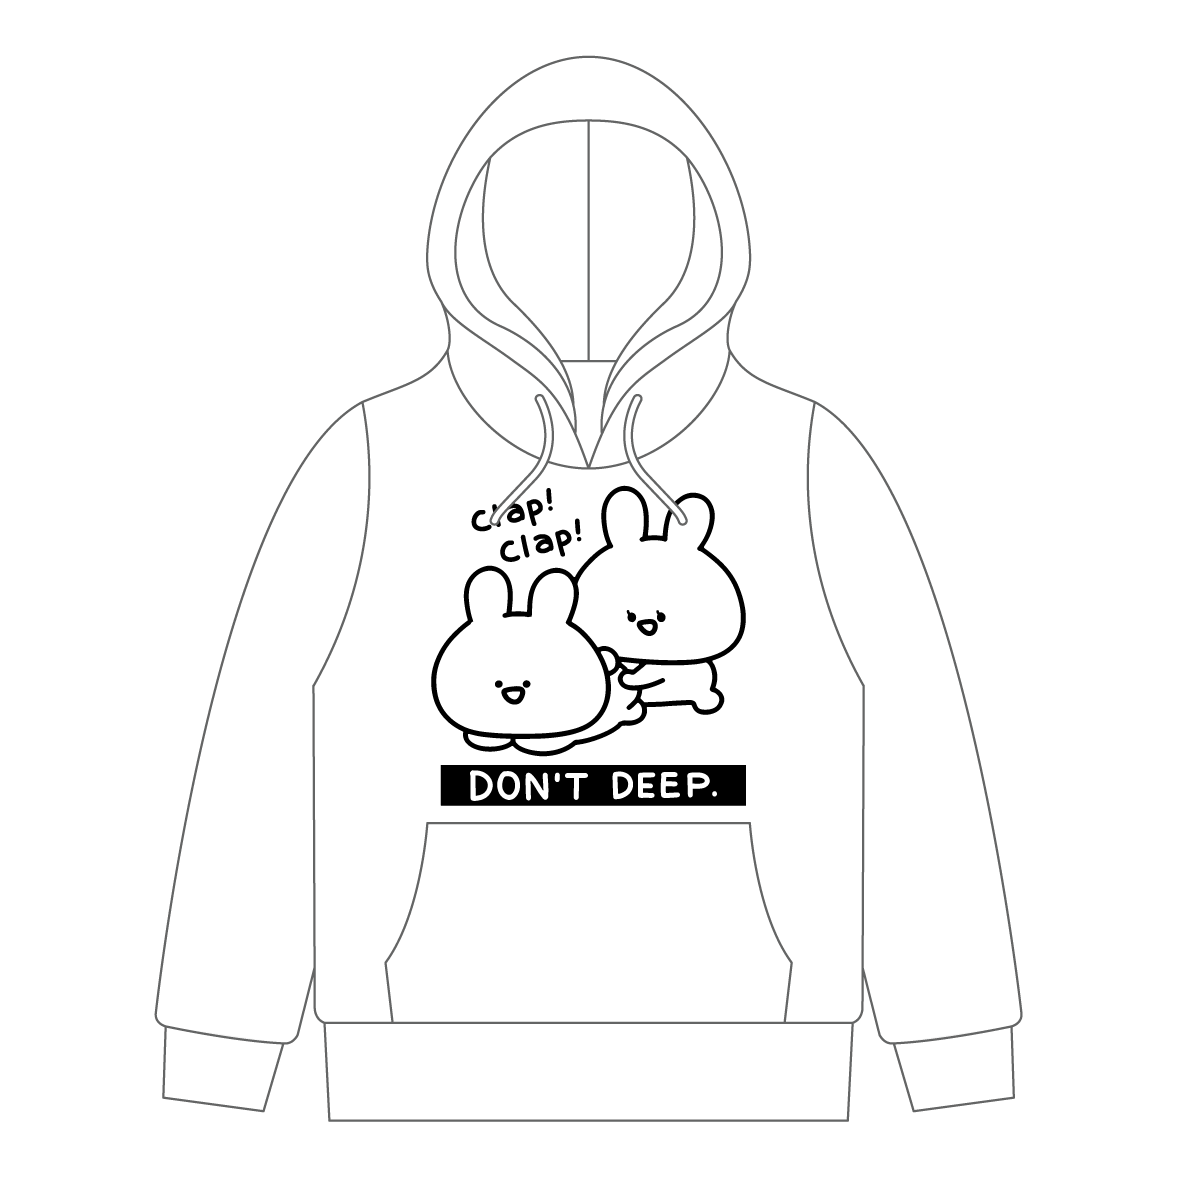 [Asamimi-chan] Parka (Don't deep) [Shipped in early March]